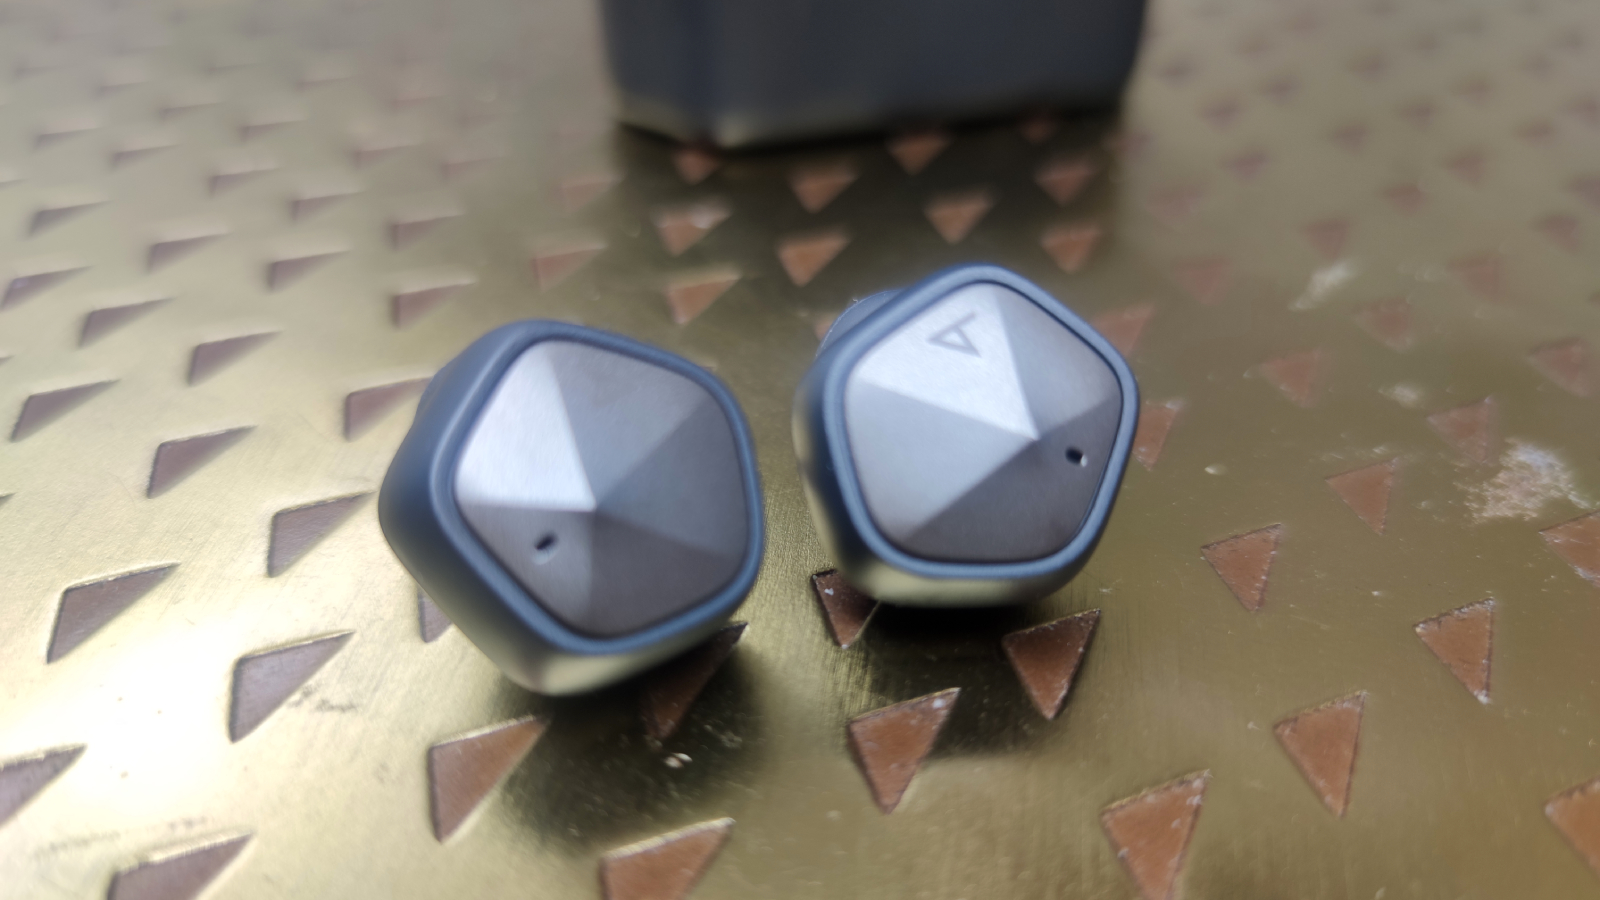 The Astell & Kern AK UW100MKII's two earbuds.